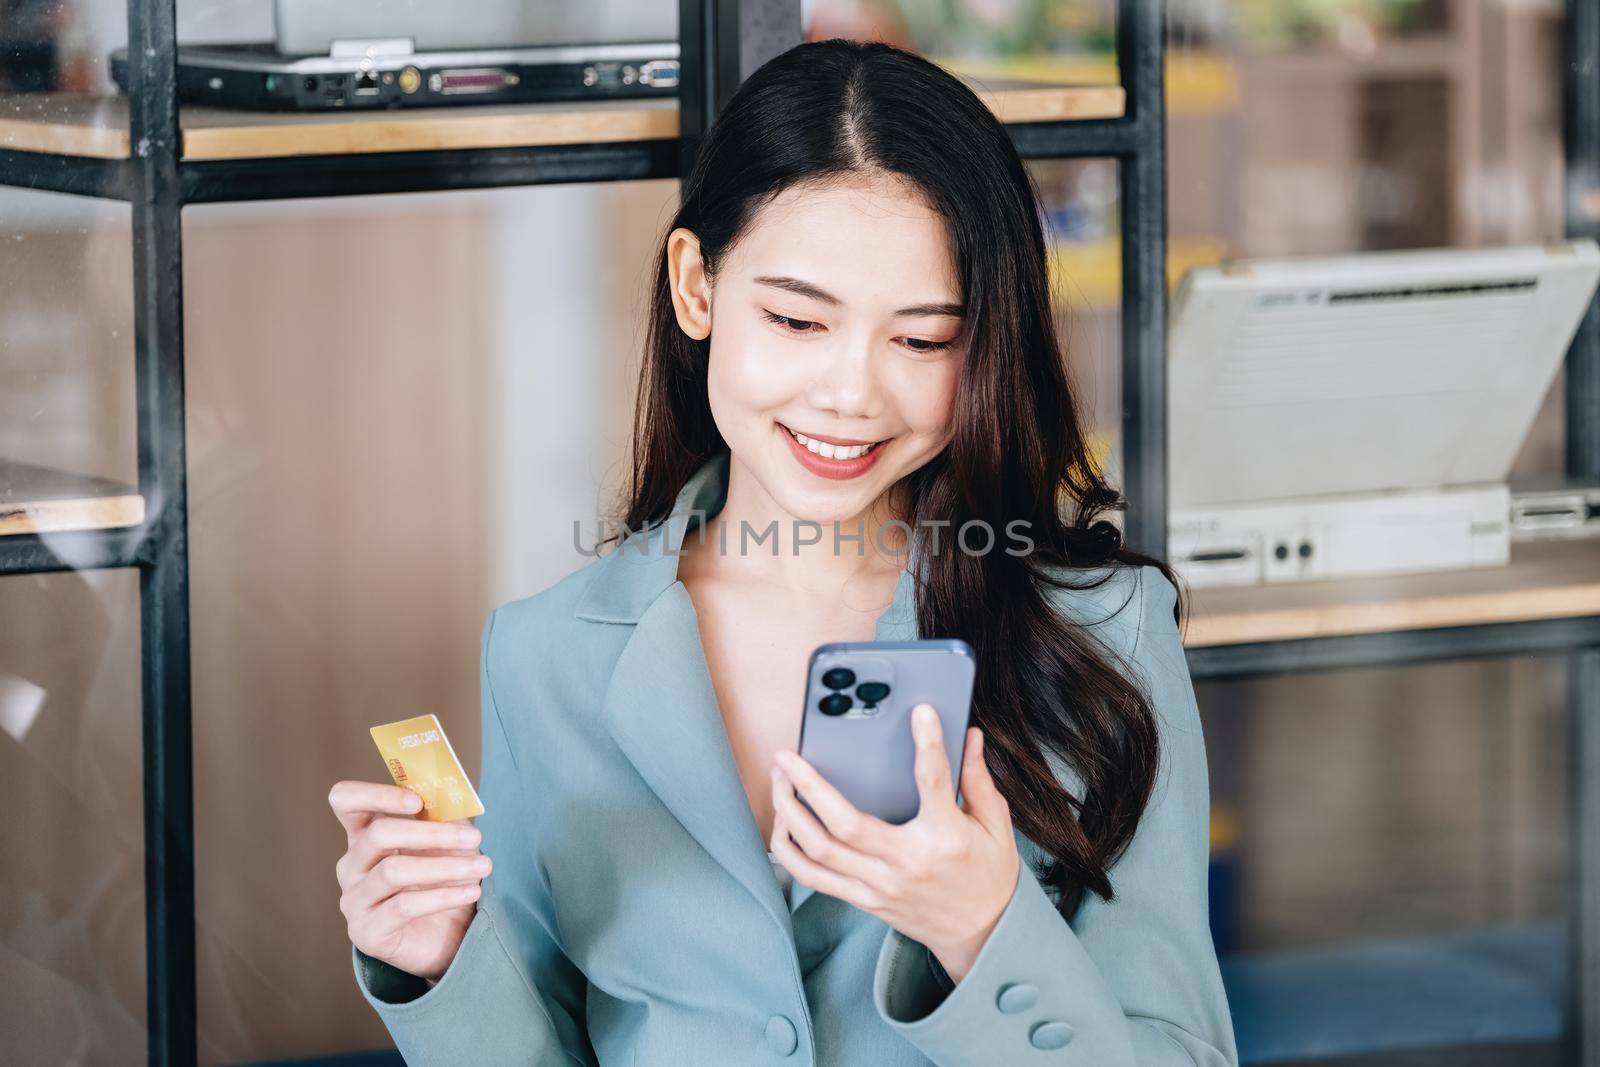 Online Shopping and Internet Payments, Beautiful Asian women are using their mobile phones and credit cards to shop online or conduct errands in the digital world